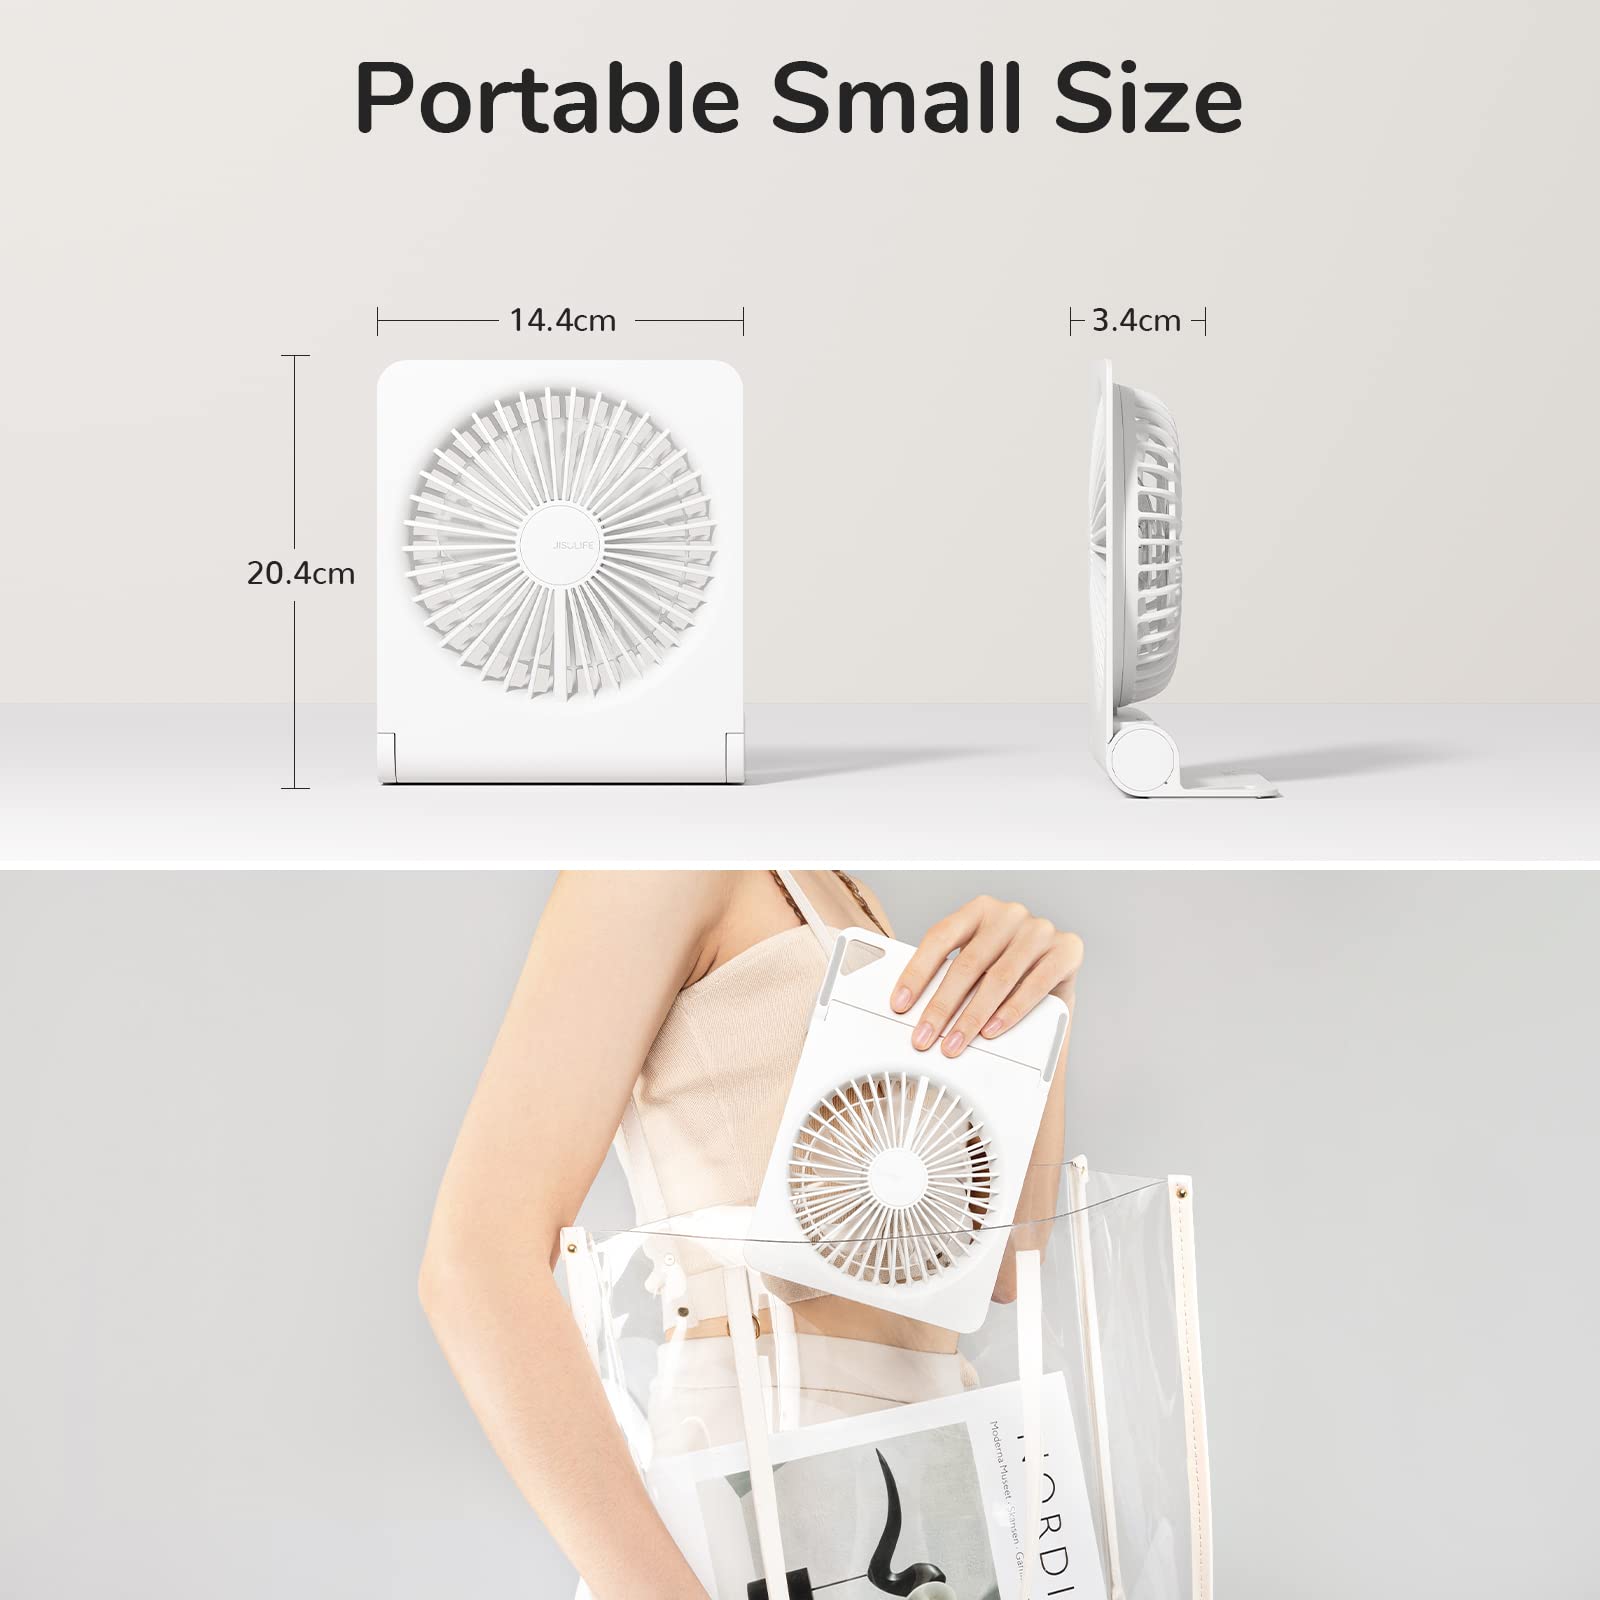 JISULIFE Small Desk Fan, Portable USB Rechargeable Fan, 160° Tilt Folding Personal Mini Fan with 4500mAh Battery, Strong Wind, Ultra Quiet, 4 Speed Modes for Office, Home, Camping - White